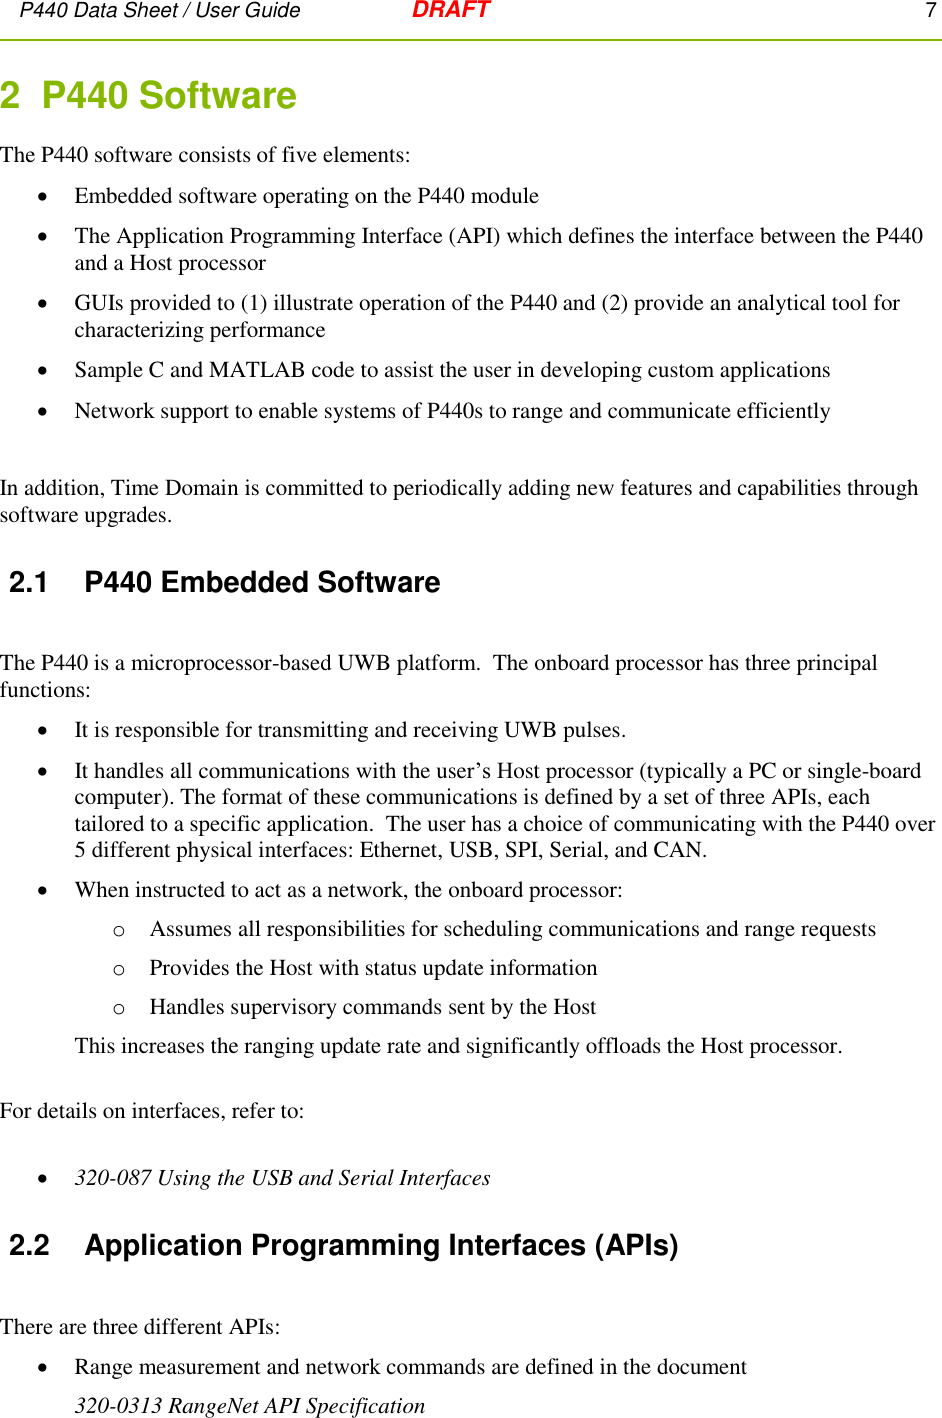 P440 Data Sheet / User Guide   DRAFT    7         2  P440 Software  The P440 software consists of five elements:  Embedded software operating on the P440 module  The Application Programming Interface (API) which defines the interface between the P440 and a Host processor  GUIs provided to (1) illustrate operation of the P440 and (2) provide an analytical tool for characterizing performance  Sample C and MATLAB code to assist the user in developing custom applications  Network support to enable systems of P440s to range and communicate efficiently  In addition, Time Domain is committed to periodically adding new features and capabilities through software upgrades. 2.1  P440 Embedded Software  The P440 is a microprocessor-based UWB platform.  The onboard processor has three principal functions:   It is responsible for transmitting and receiving UWB pulses.  It handles all communications with the user’s Host processor (typically a PC or single-board computer). The format of these communications is defined by a set of three APIs, each tailored to a specific application.  The user has a choice of communicating with the P440 over 5 different physical interfaces: Ethernet, USB, SPI, Serial, and CAN.    When instructed to act as a network, the onboard processor:  o Assumes all responsibilities for scheduling communications and range requests o Provides the Host with status update information  o Handles supervisory commands sent by the Host This increases the ranging update rate and significantly offloads the Host processor.  For details on interfaces, refer to:   320-087 Using the USB and Serial Interfaces 2.2  Application Programming Interfaces (APIs)  There are three different APIs:  Range measurement and network commands are defined in the document  320-0313 RangeNet API Specification 